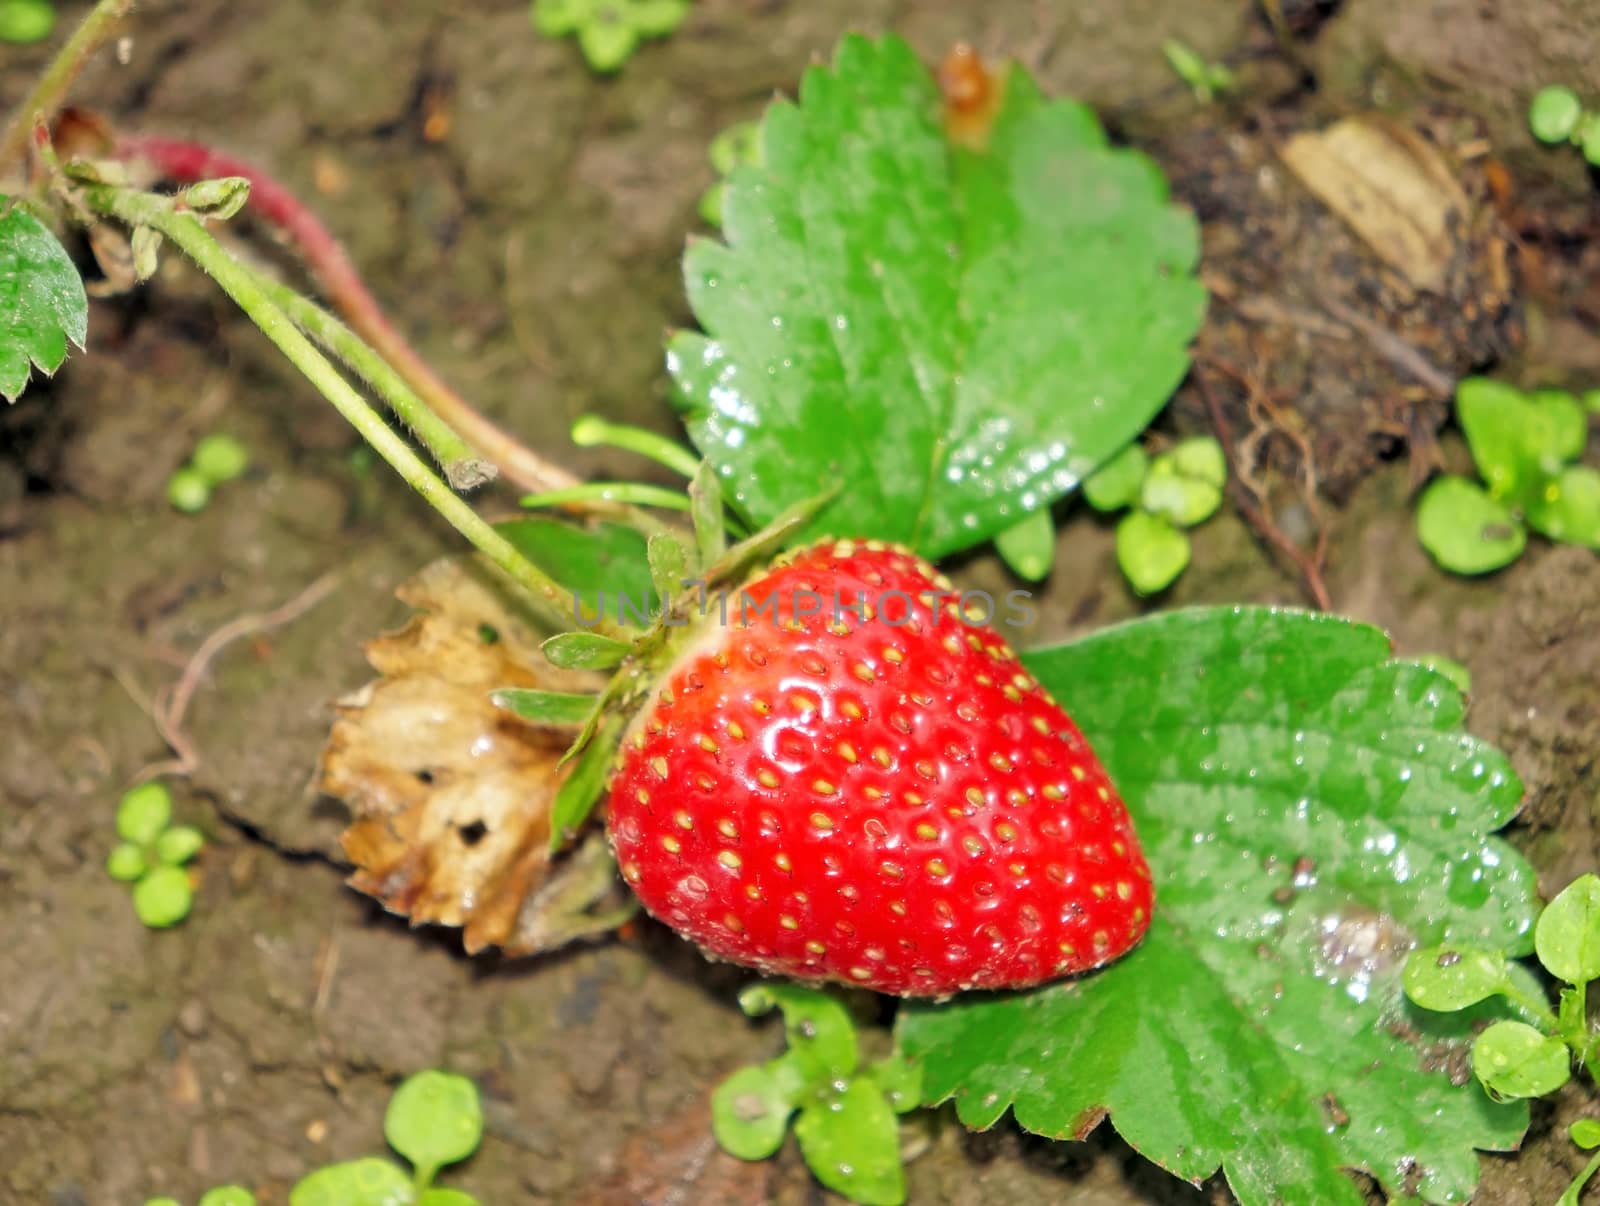  Red ripe strawberry on a bed in the garden            